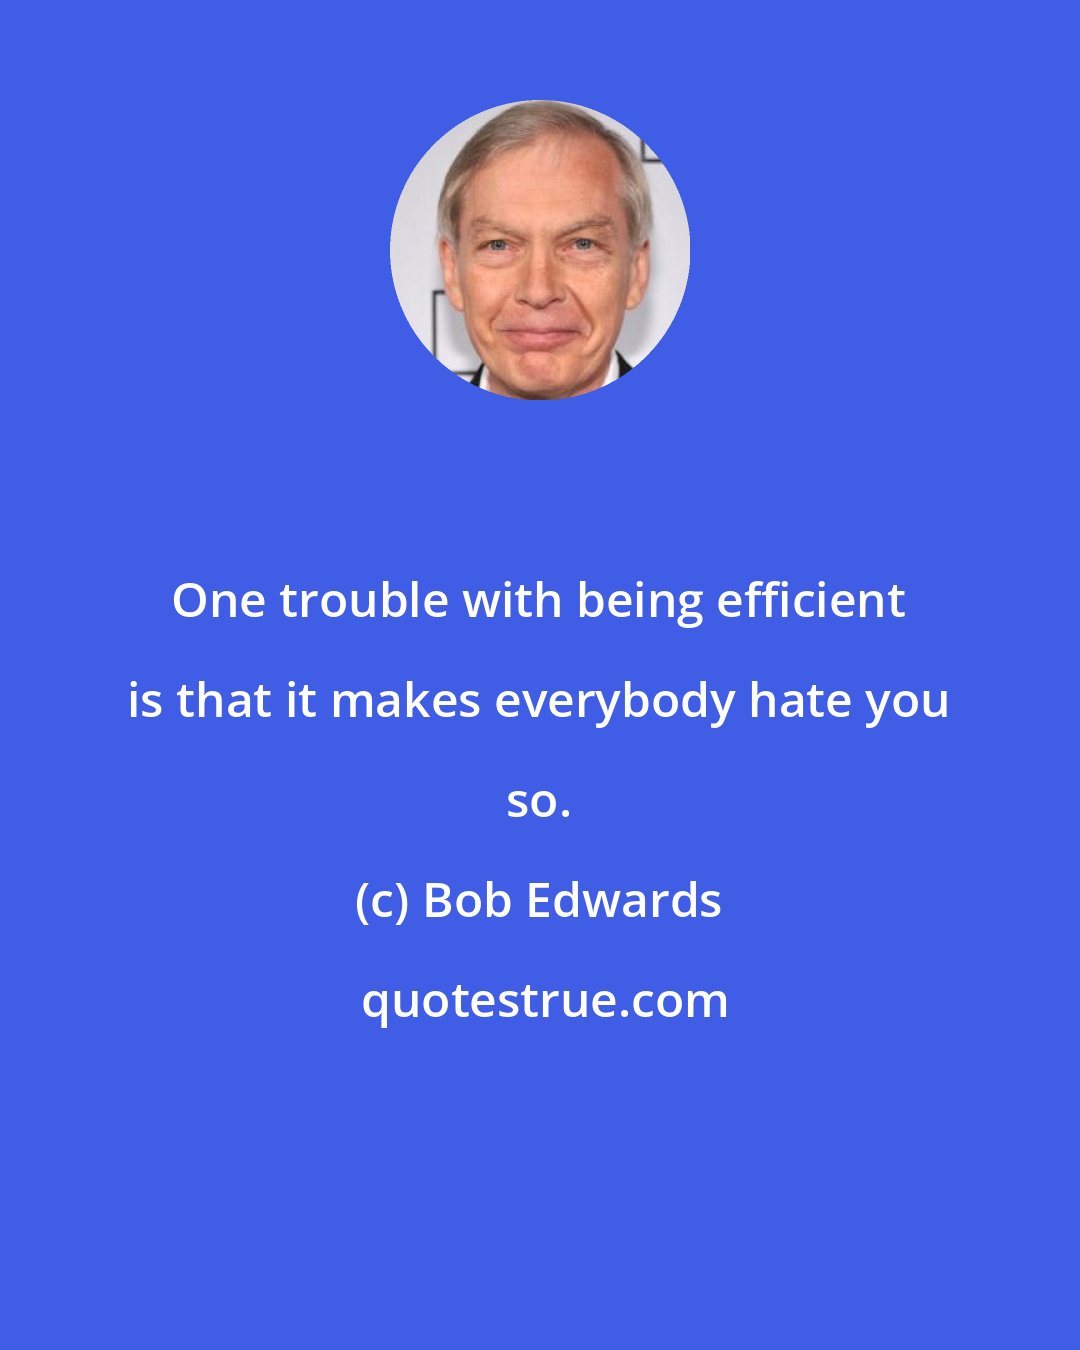 Bob Edwards: One trouble with being efficient is that it makes everybody hate you so.